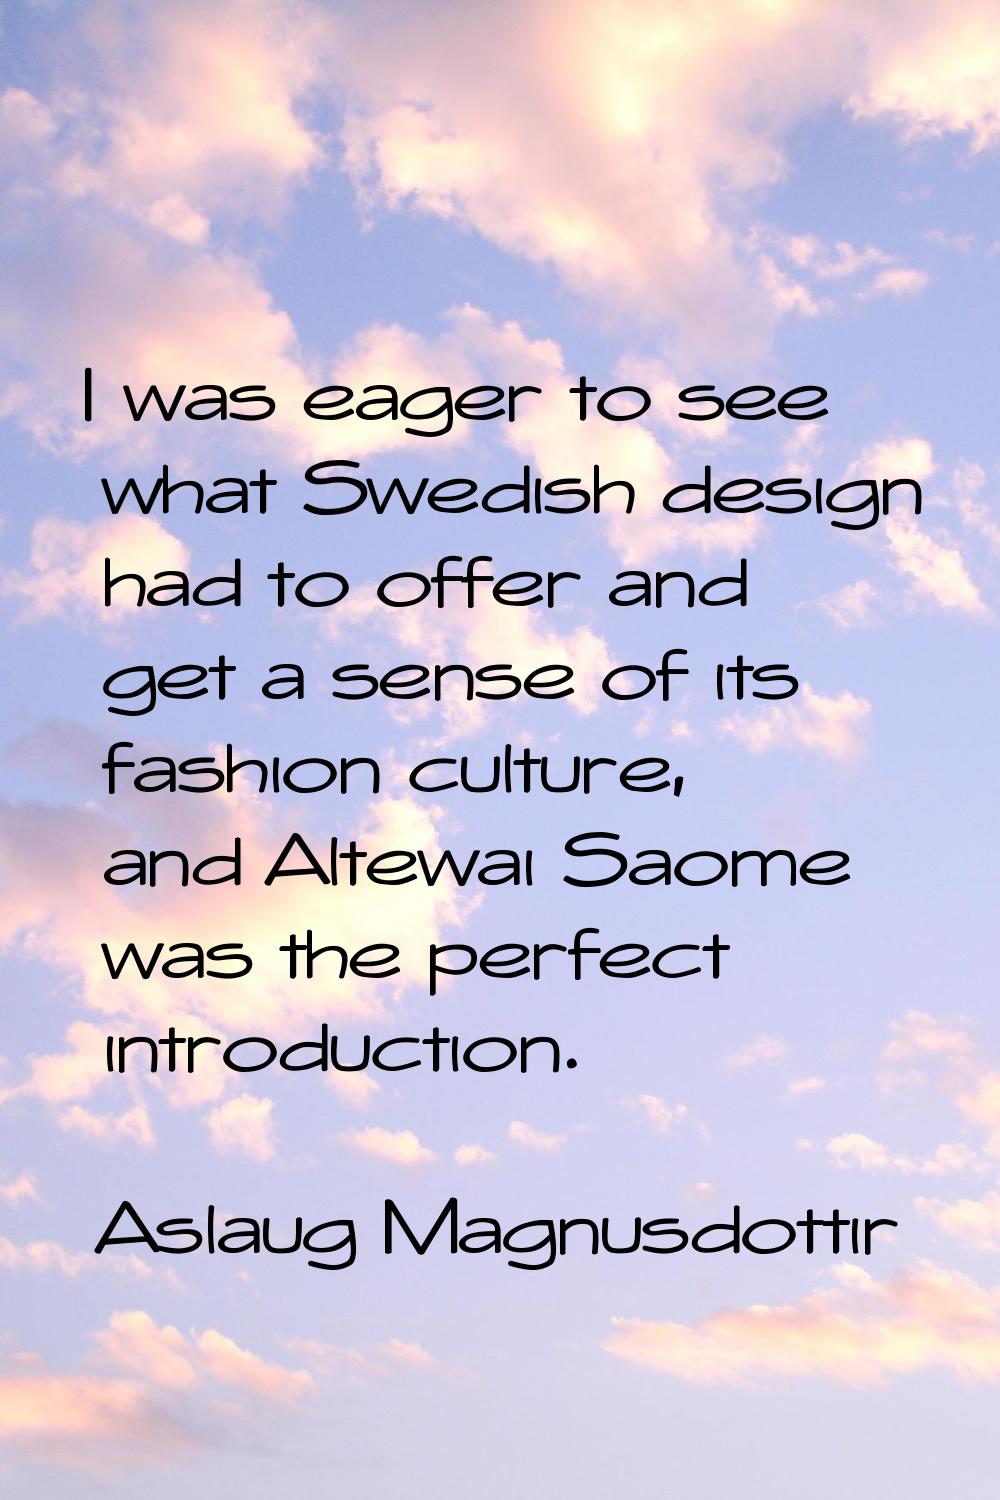 I was eager to see what Swedish design had to offer and get a sense of its fashion culture, and Alt